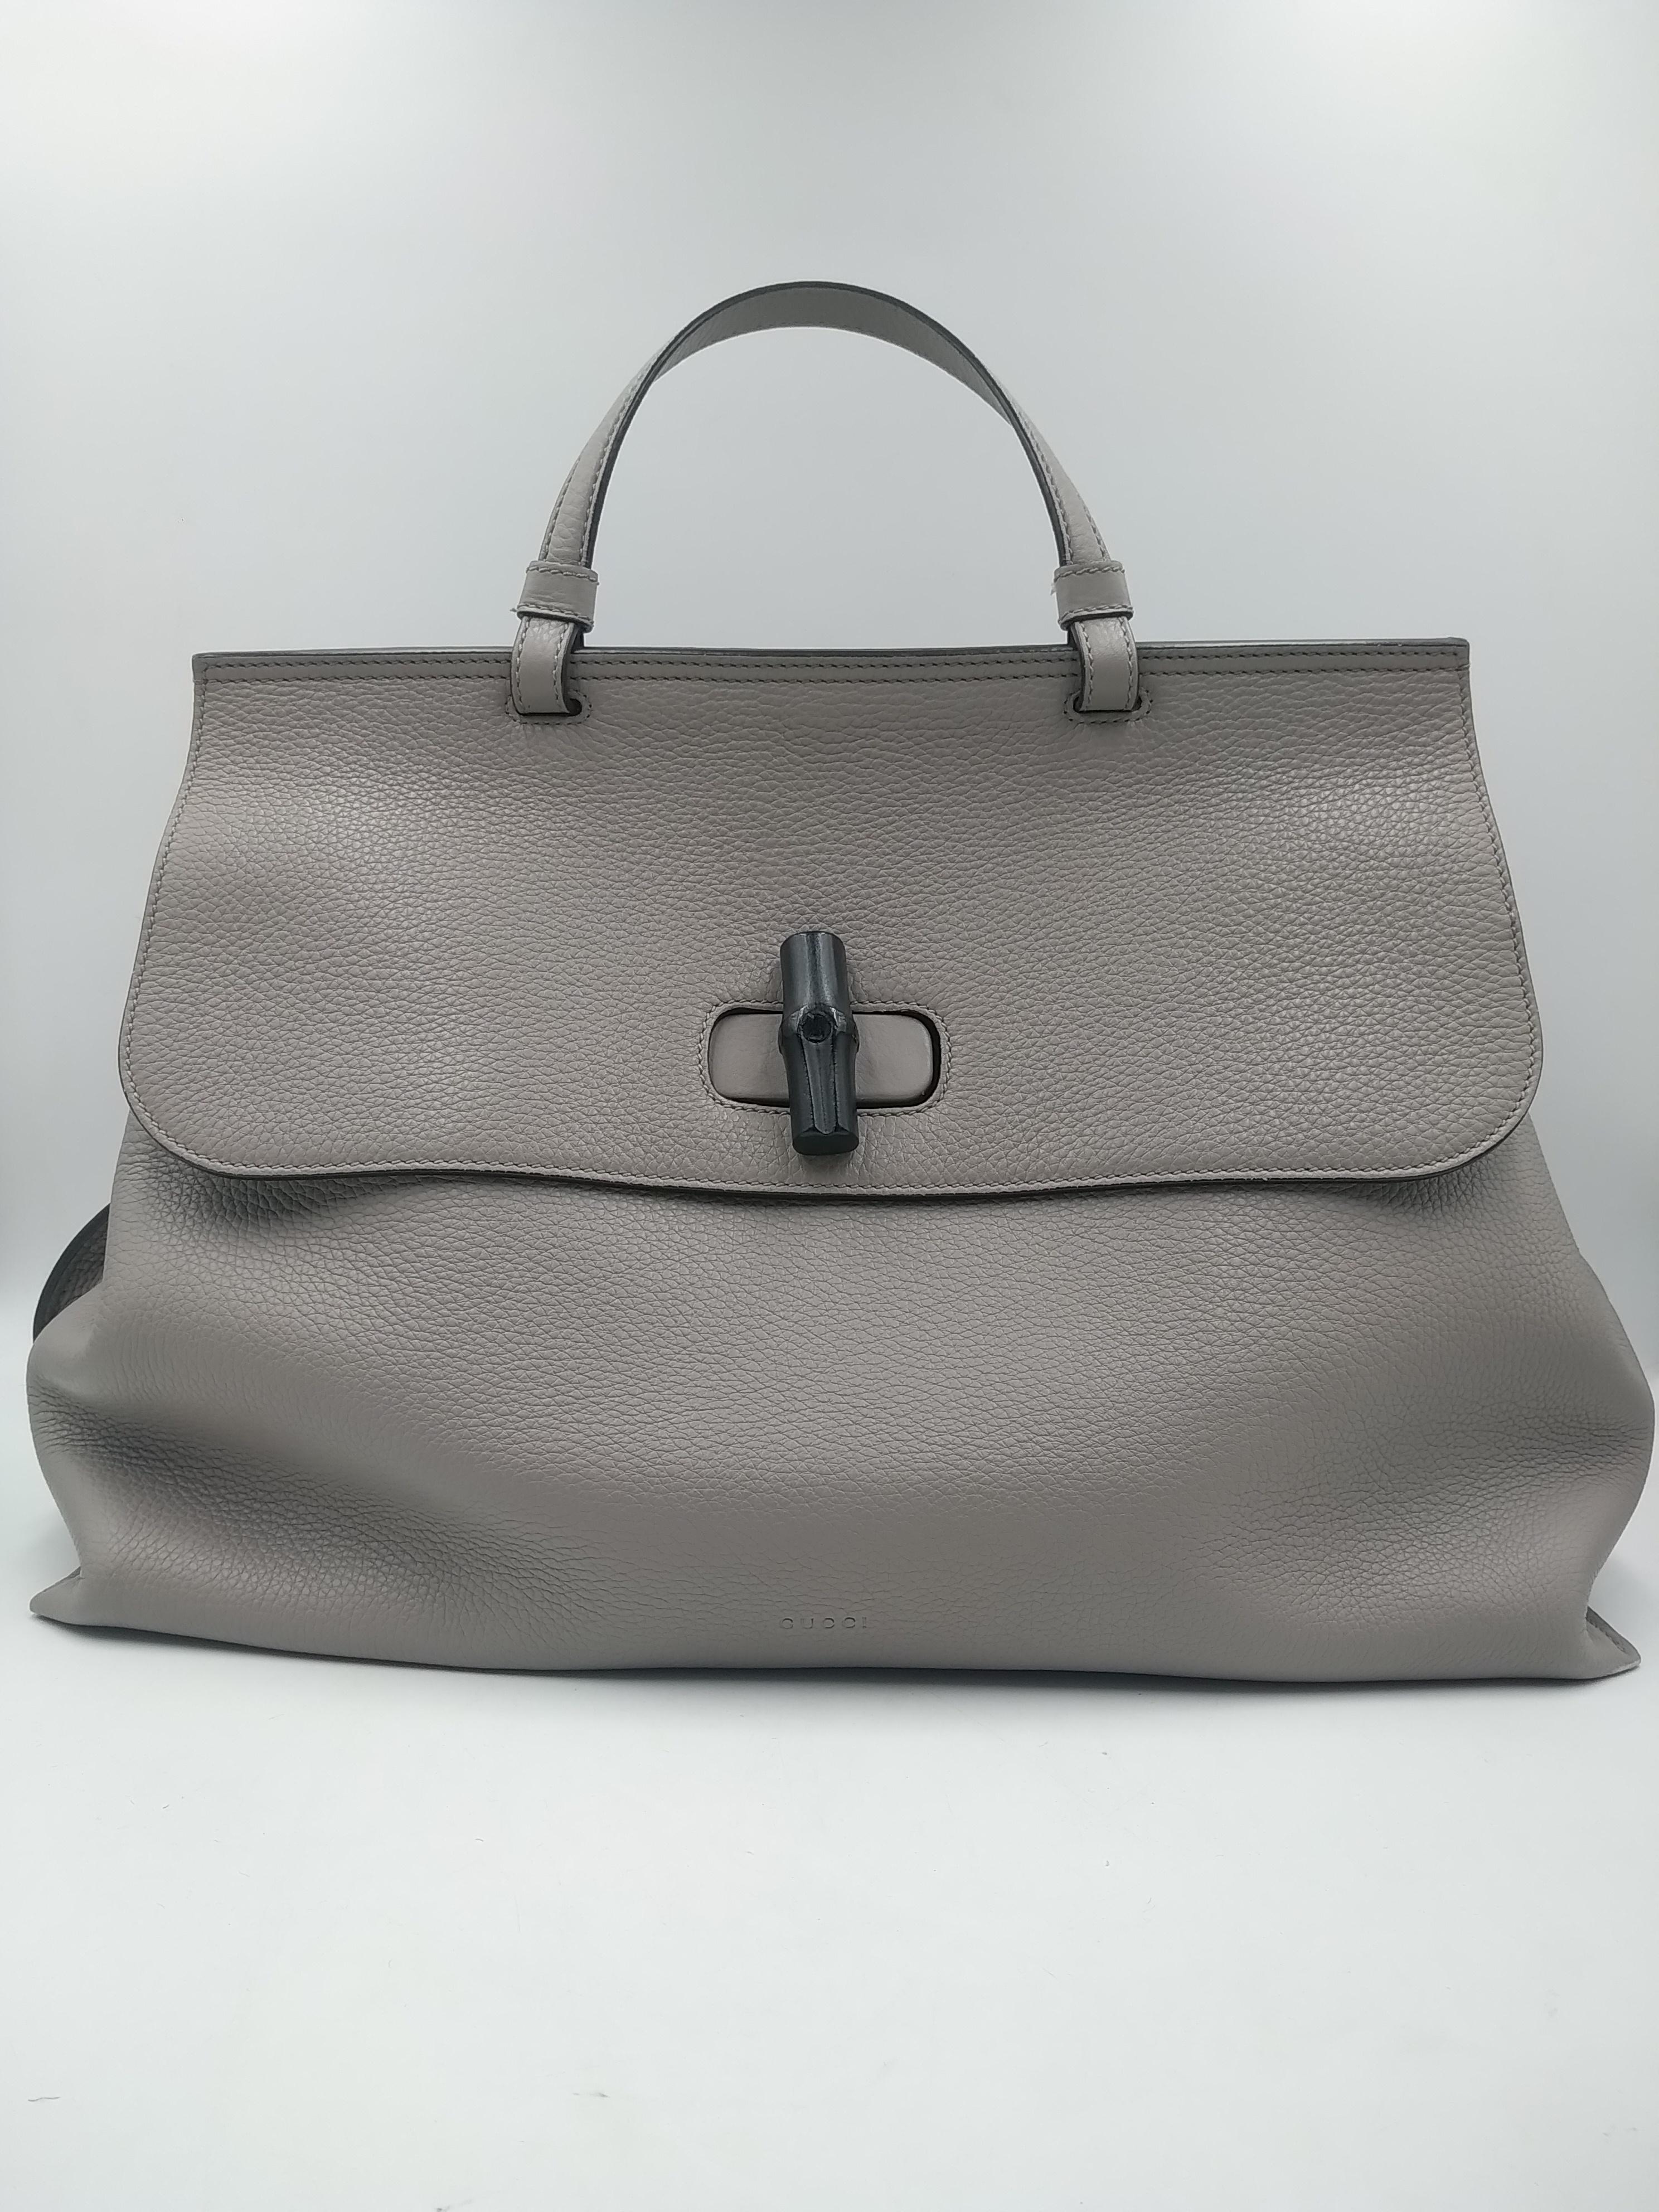 Gucci Bamboo Gray Daily Top Handle Shoulder Bag, 2015
- 100% authentic Gucci
- very soft gray grained calfskin
- opening with a dark brown bamboo turn-lock
- lined in pastel rose colored striped canvas
- one zip pocket against the back and two small